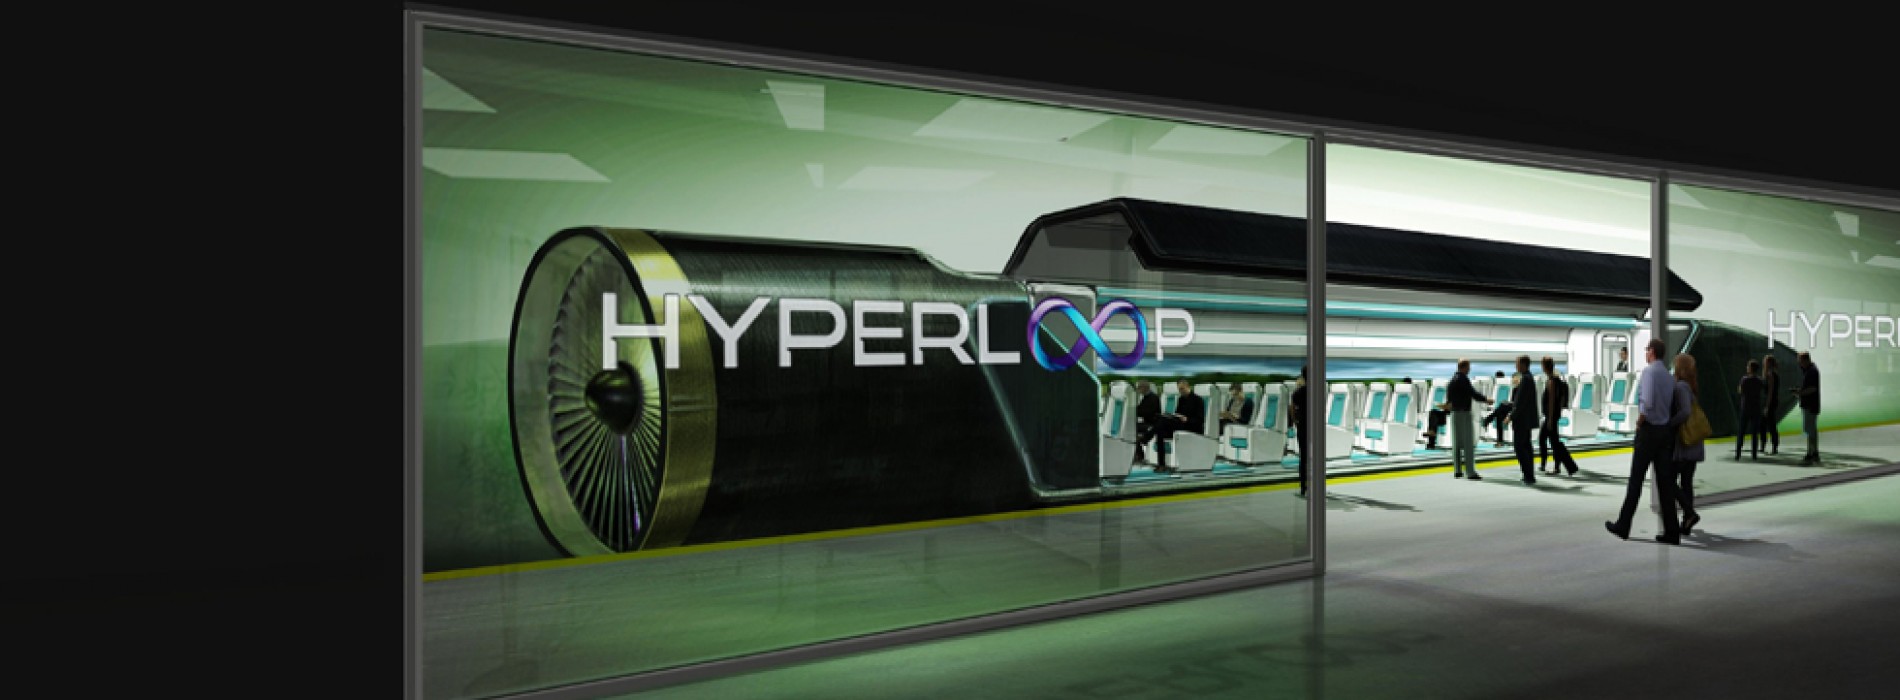 To make travel at 1,000 kmph possible in India, US-based Hyperloop in talks to raise $100 mn for India